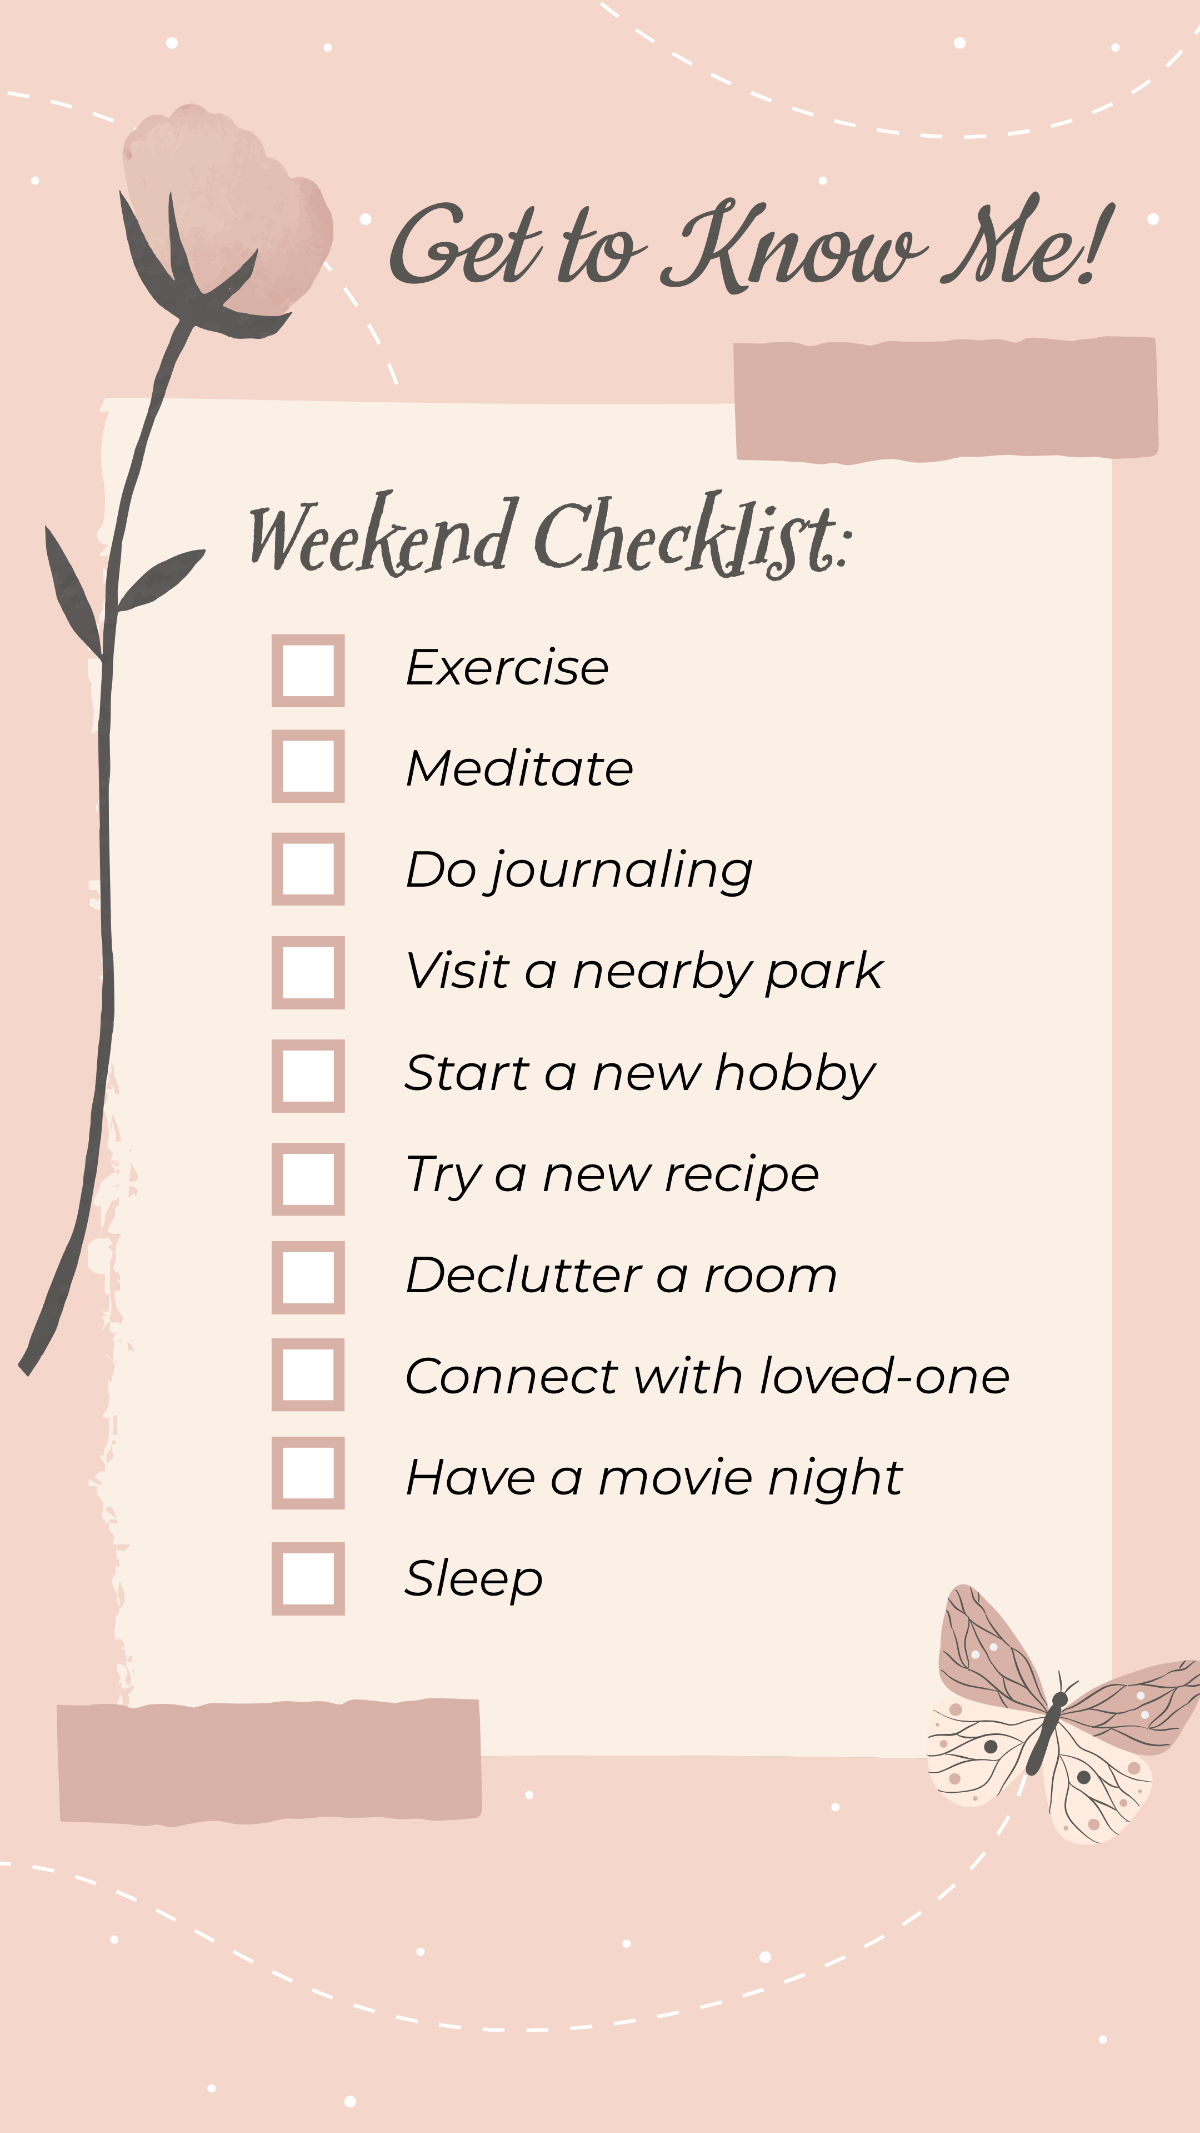 Get to Know Me Weekend Checklist Instagram Story Template